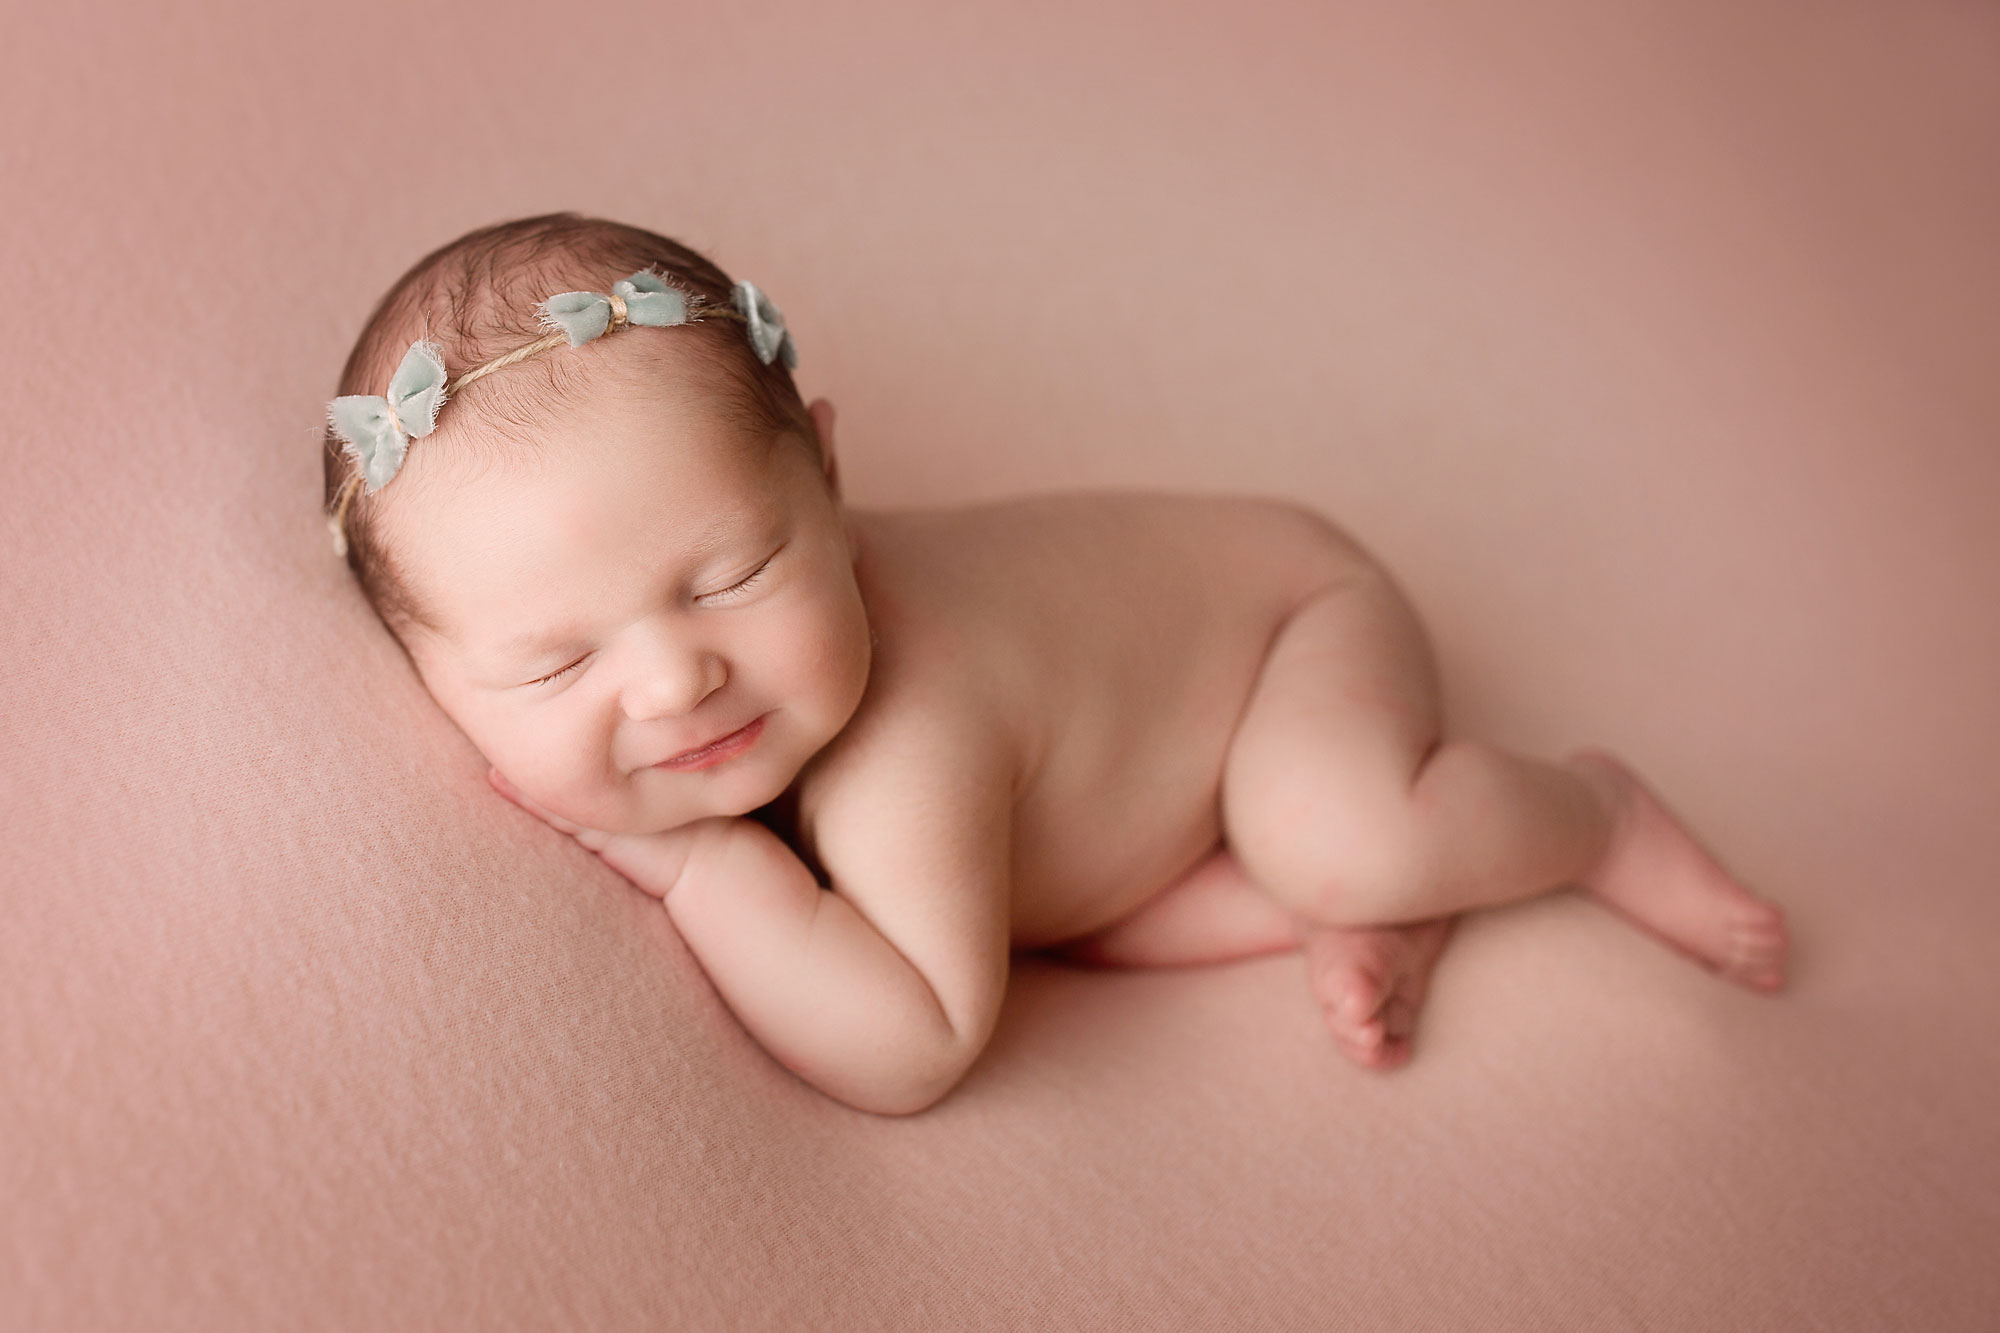 middlesex county nj newborn photography, naked baby girl asleep on pink blanket with blue bow headband